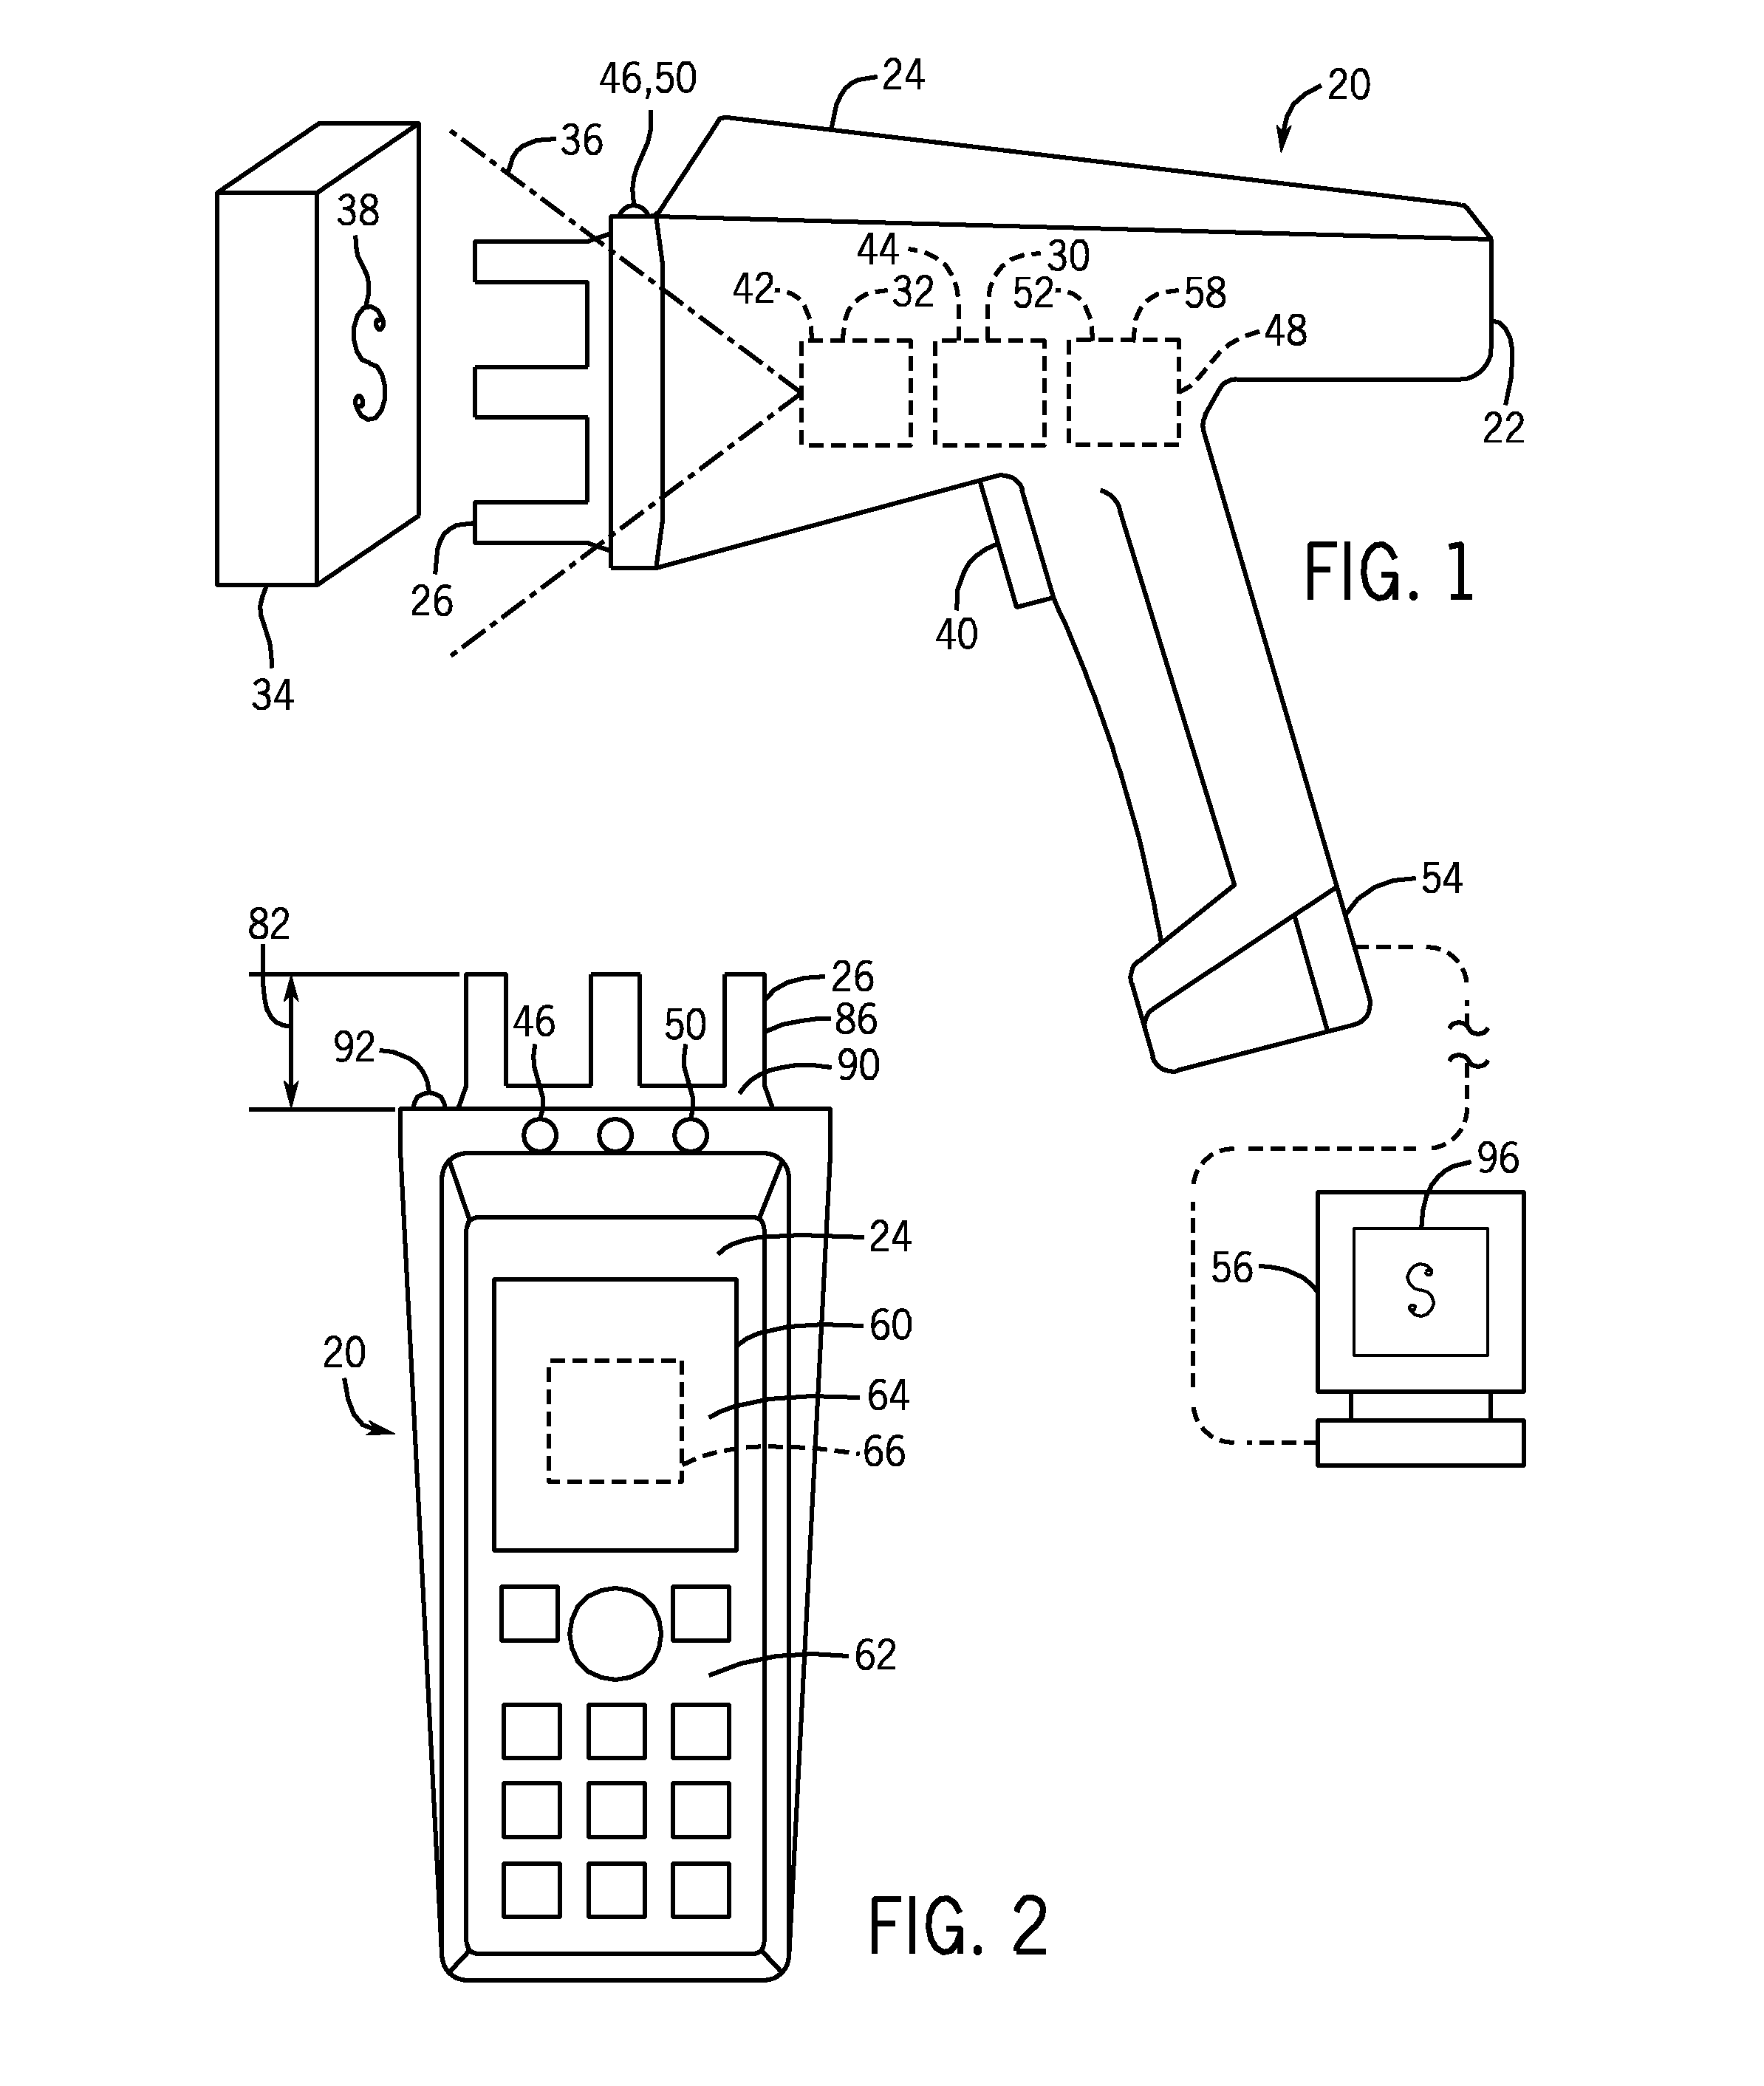 Trainable handheld optical character recognition systems and methods